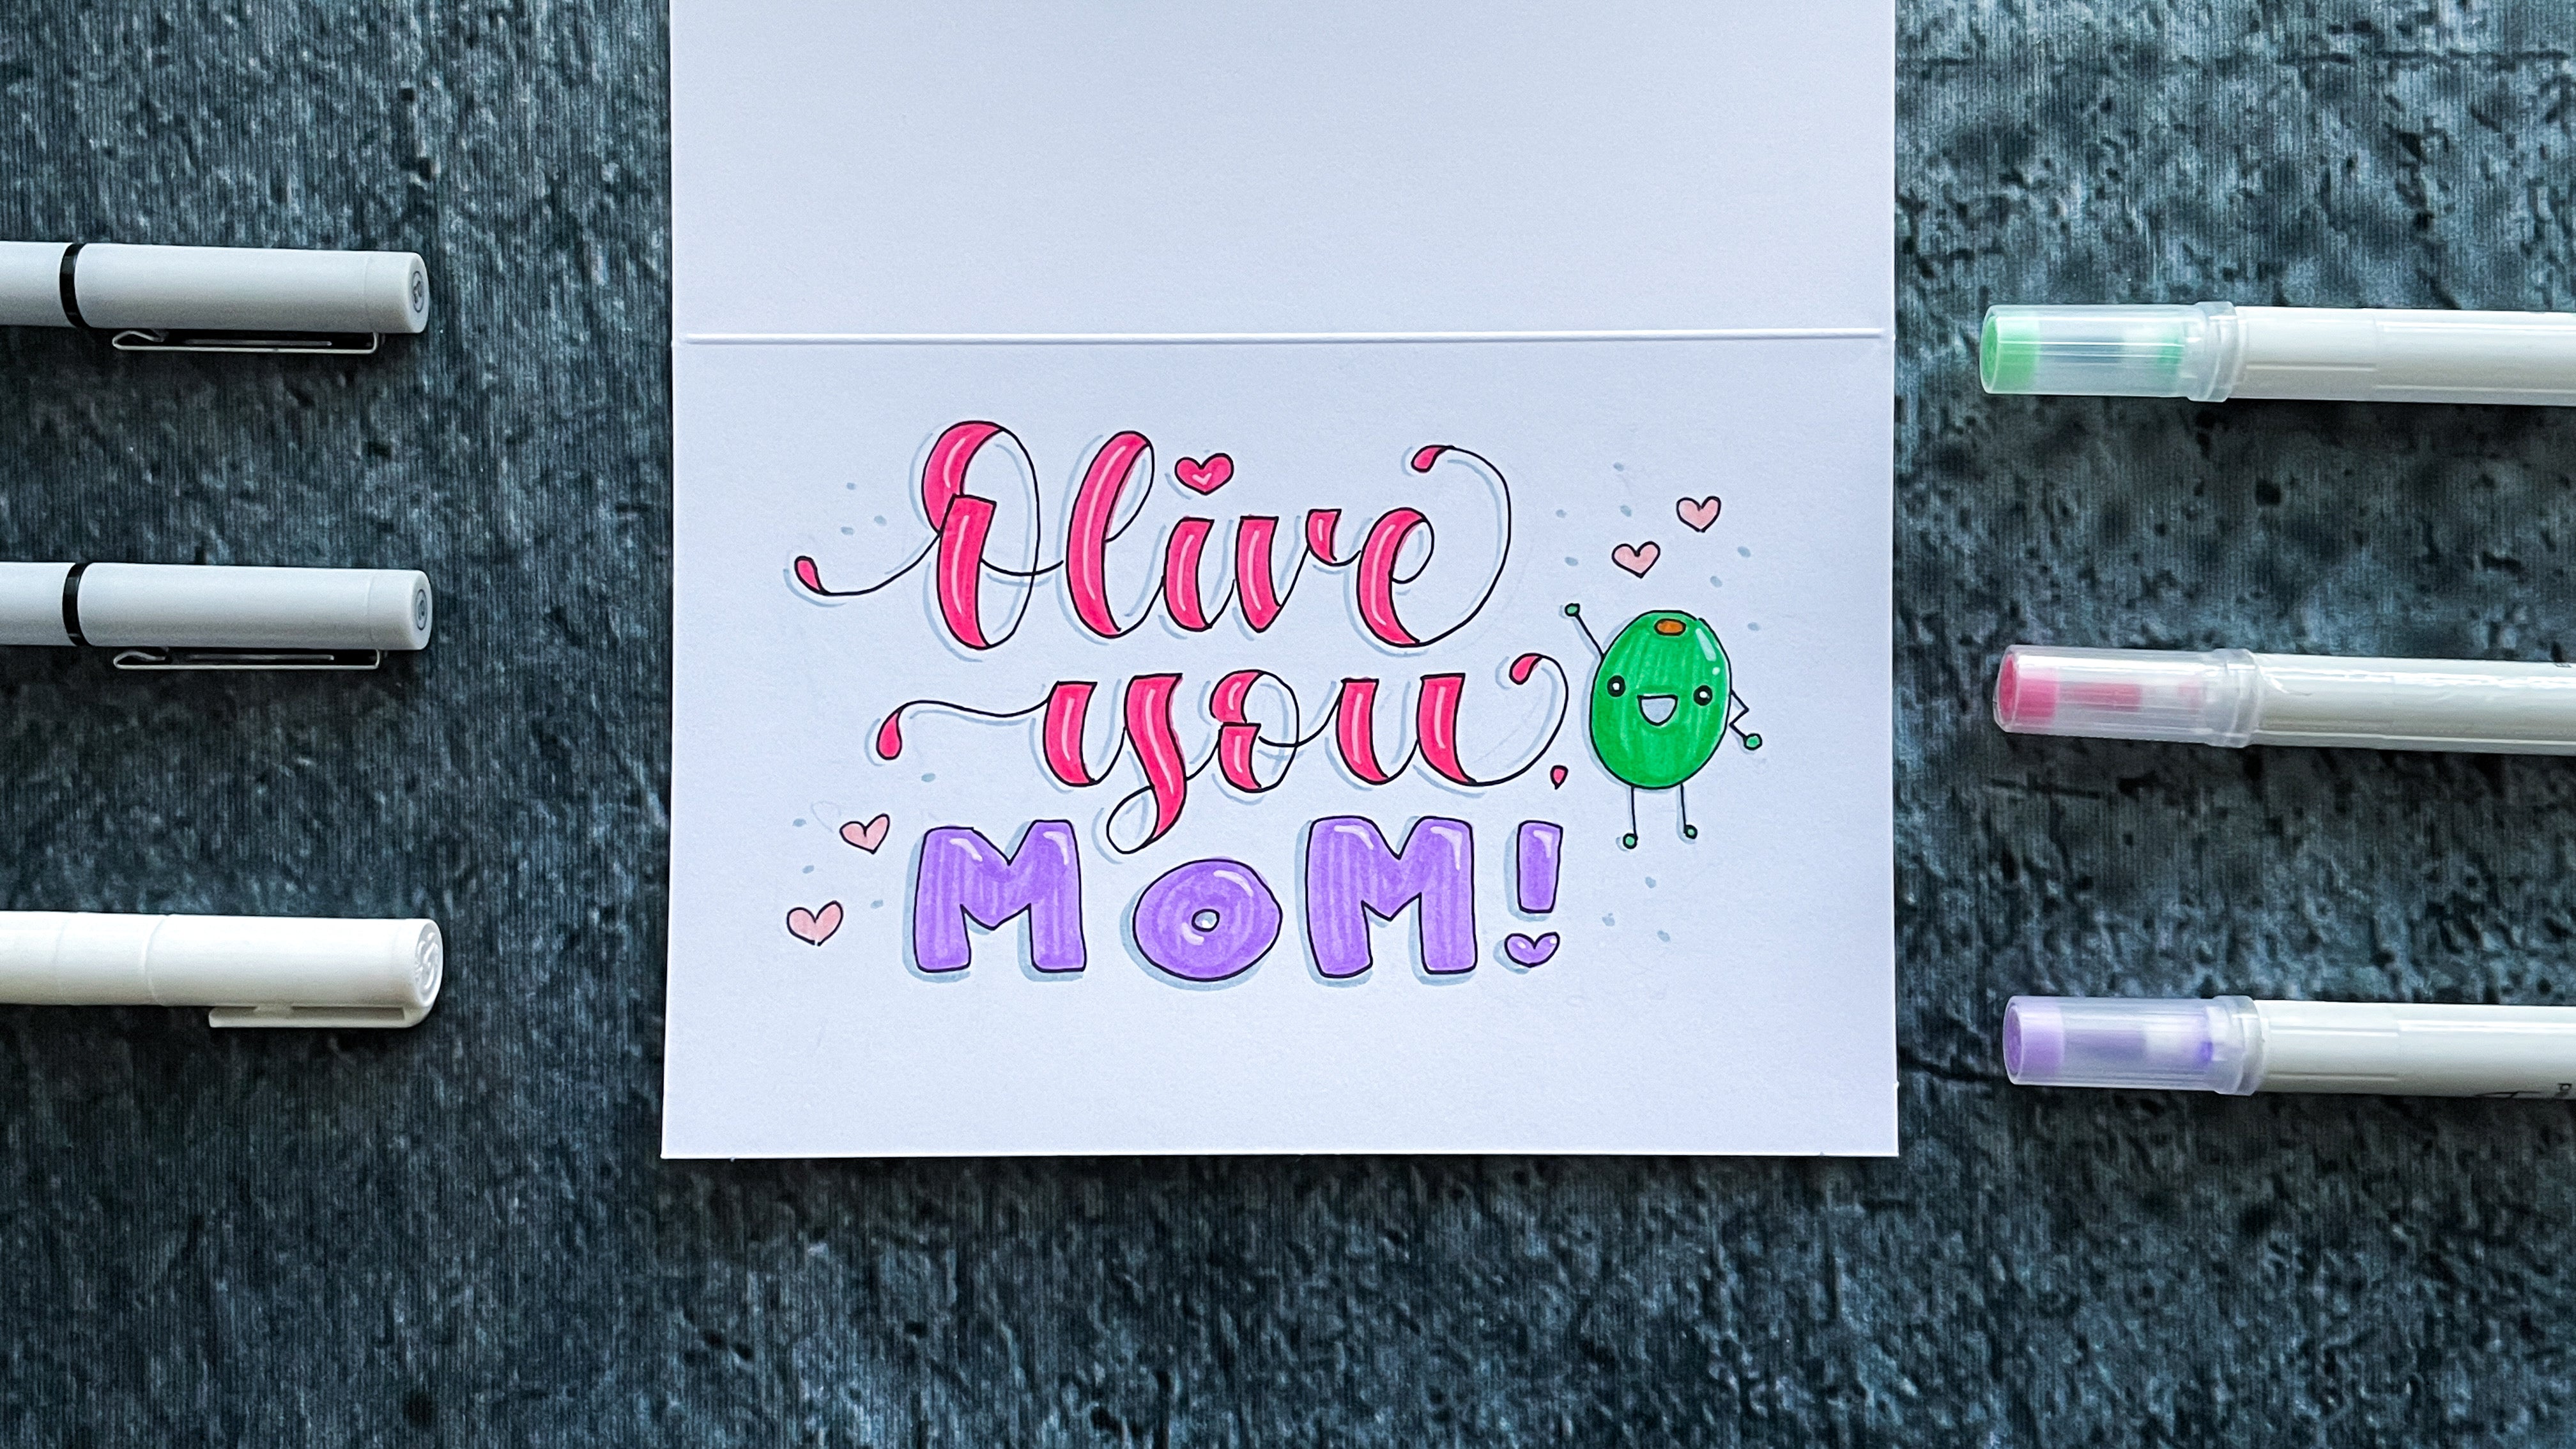 Inked and colored text of olive you mom and olive doodle on cardstock surrounded by pens